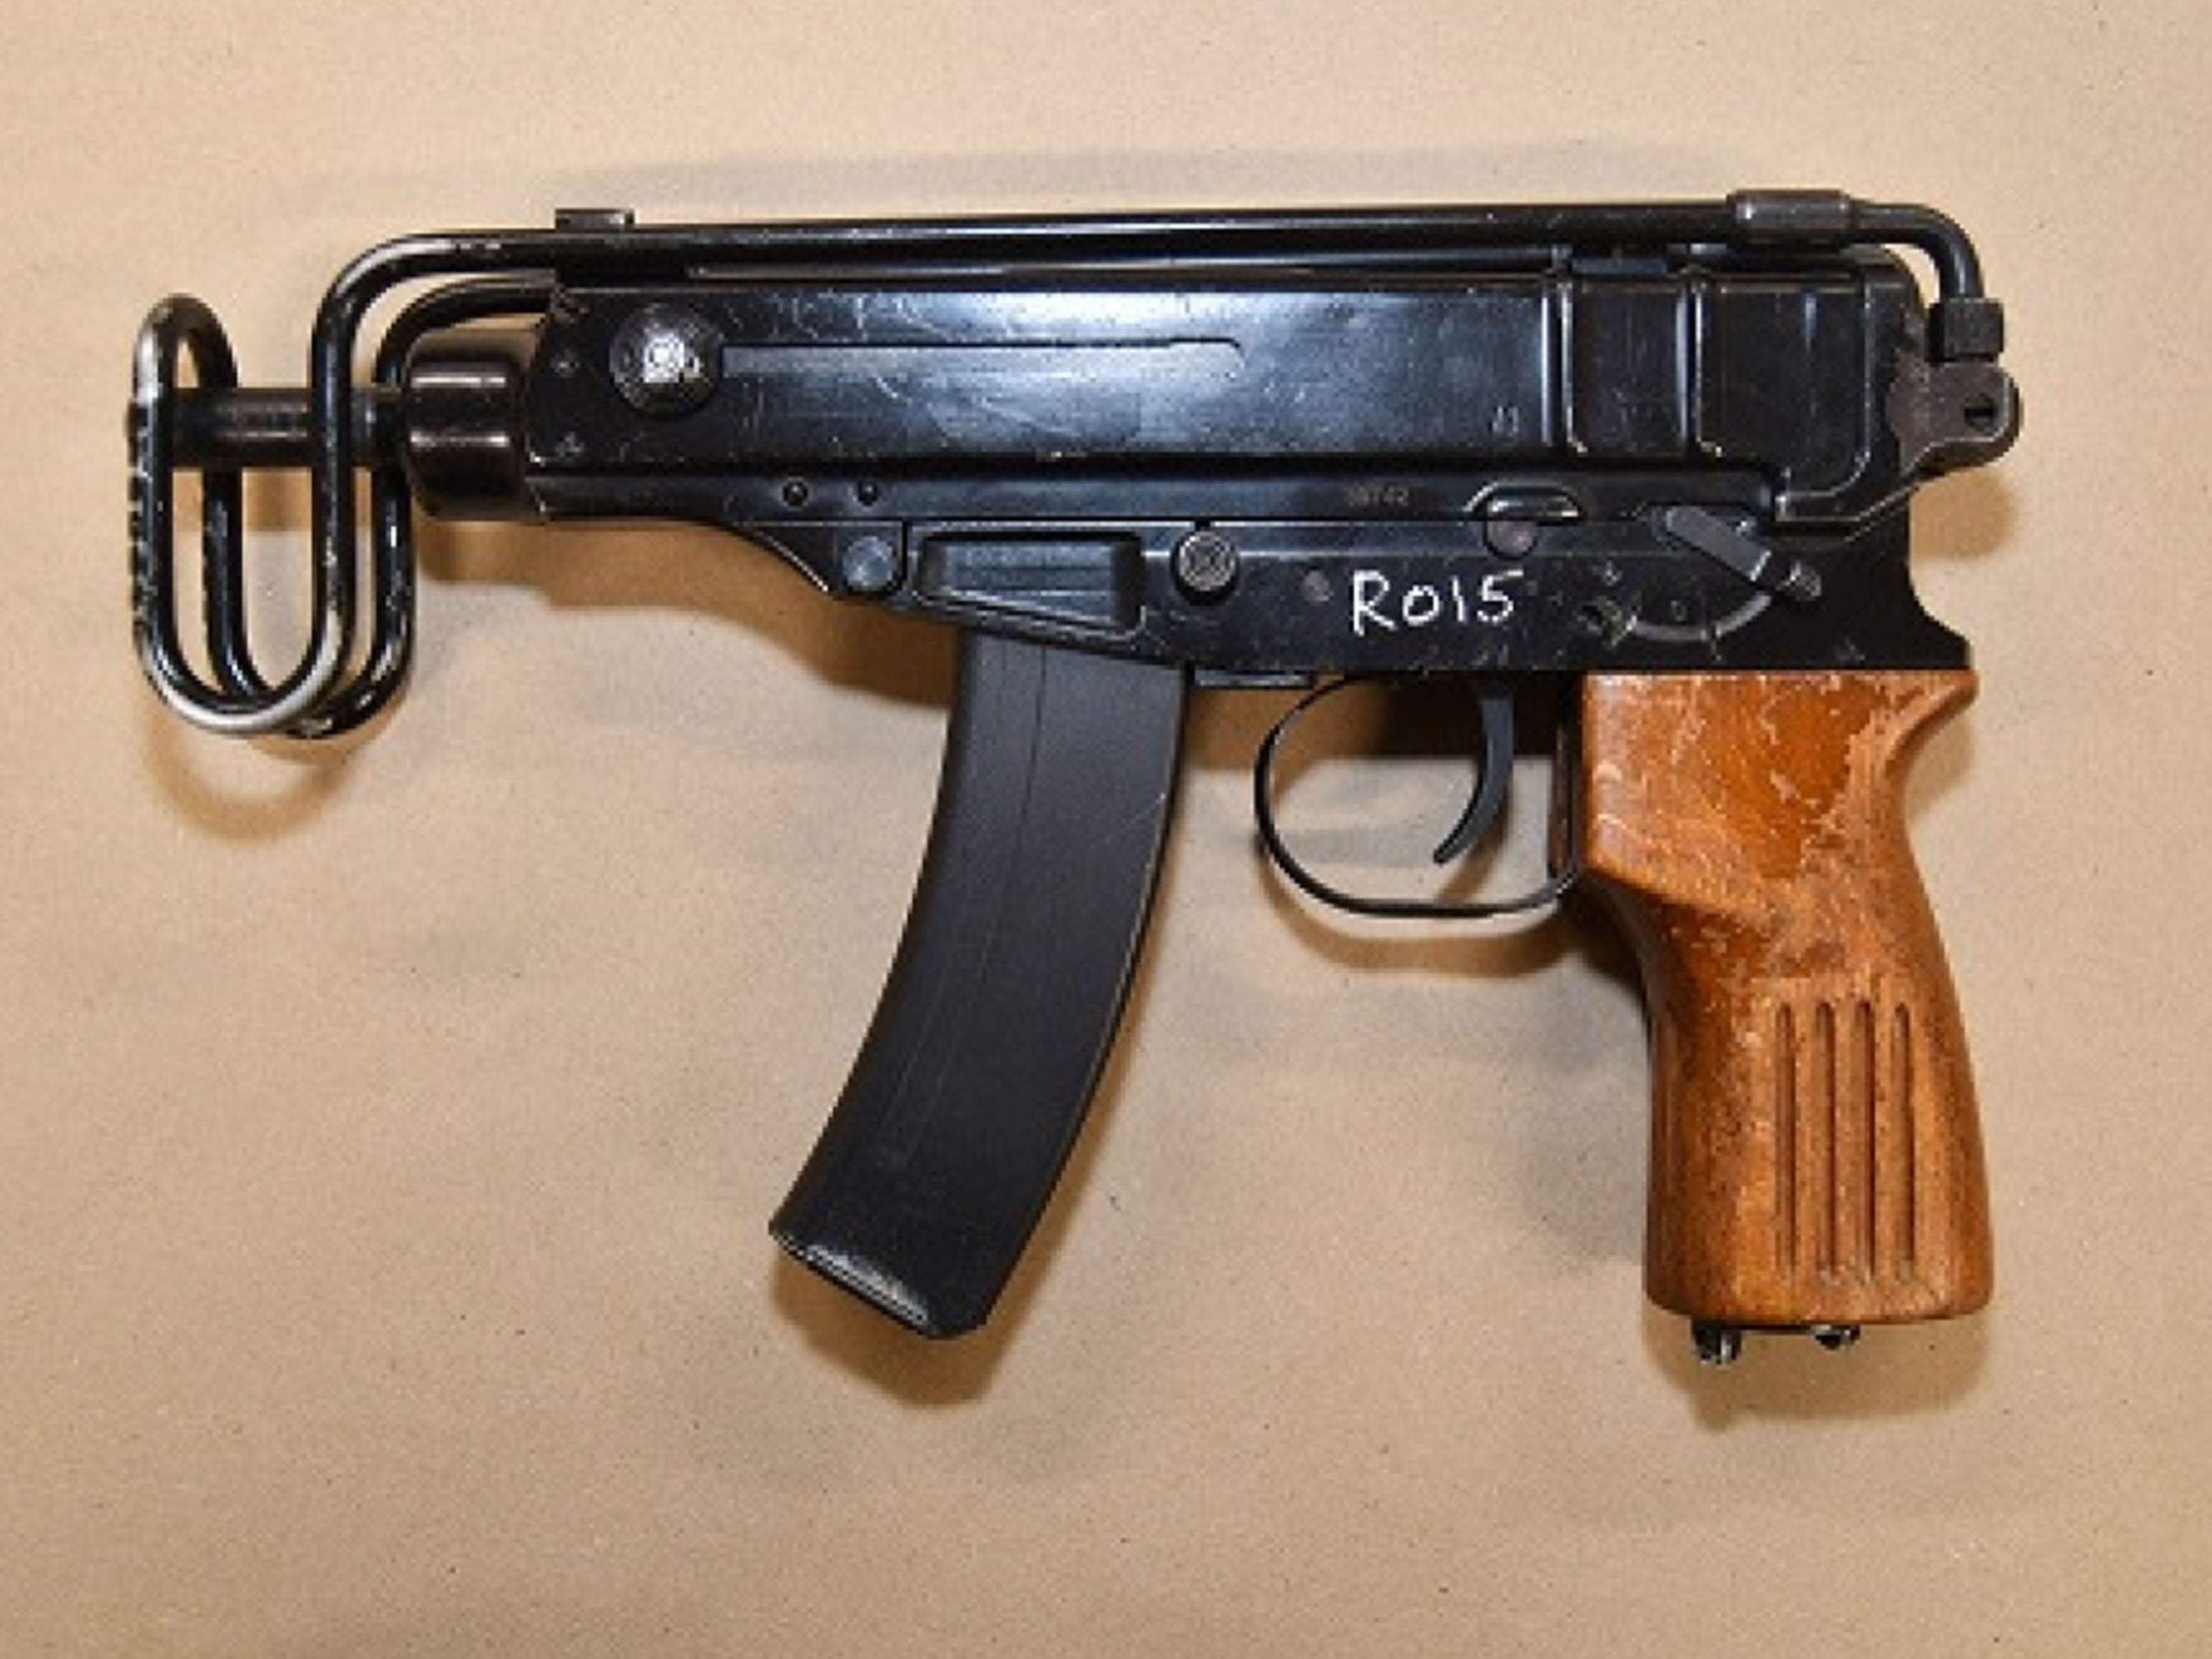 A Skorpion sub-machine gun like that used by Chapman to carry out the attack